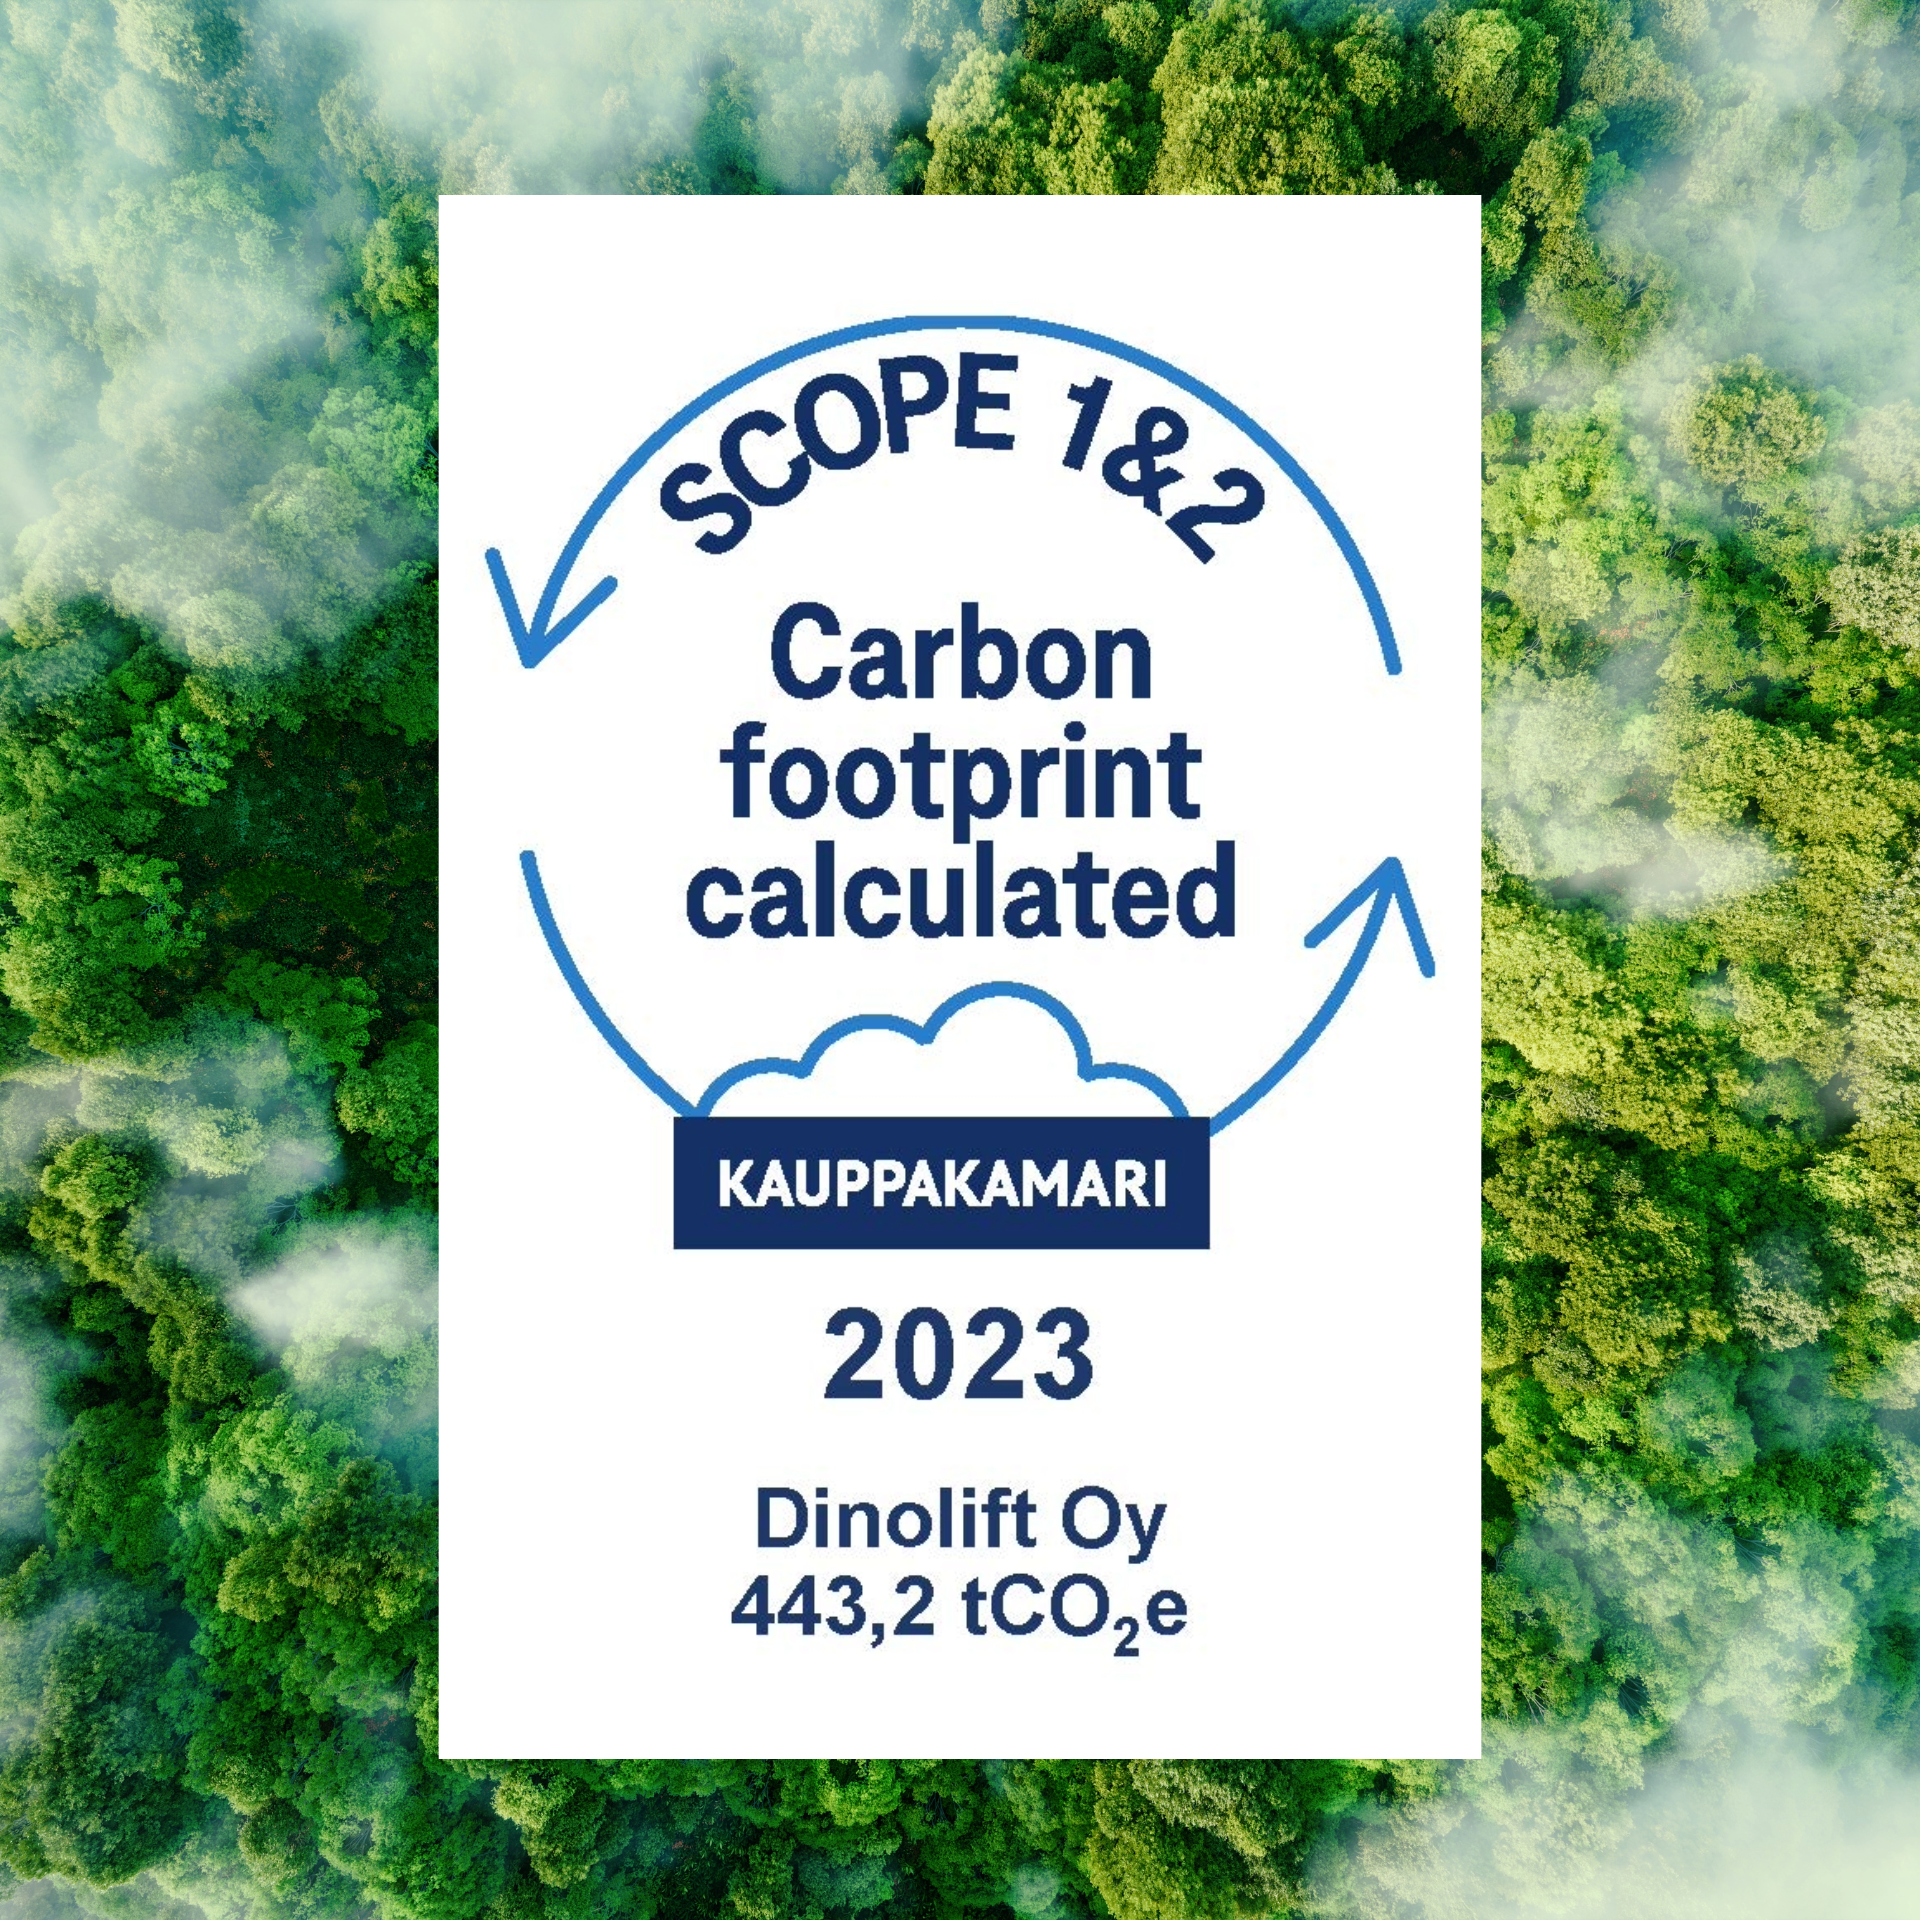 Dinolift Oy Joins the Climate Program: Leading the Way with Carbon Footprint Calculation